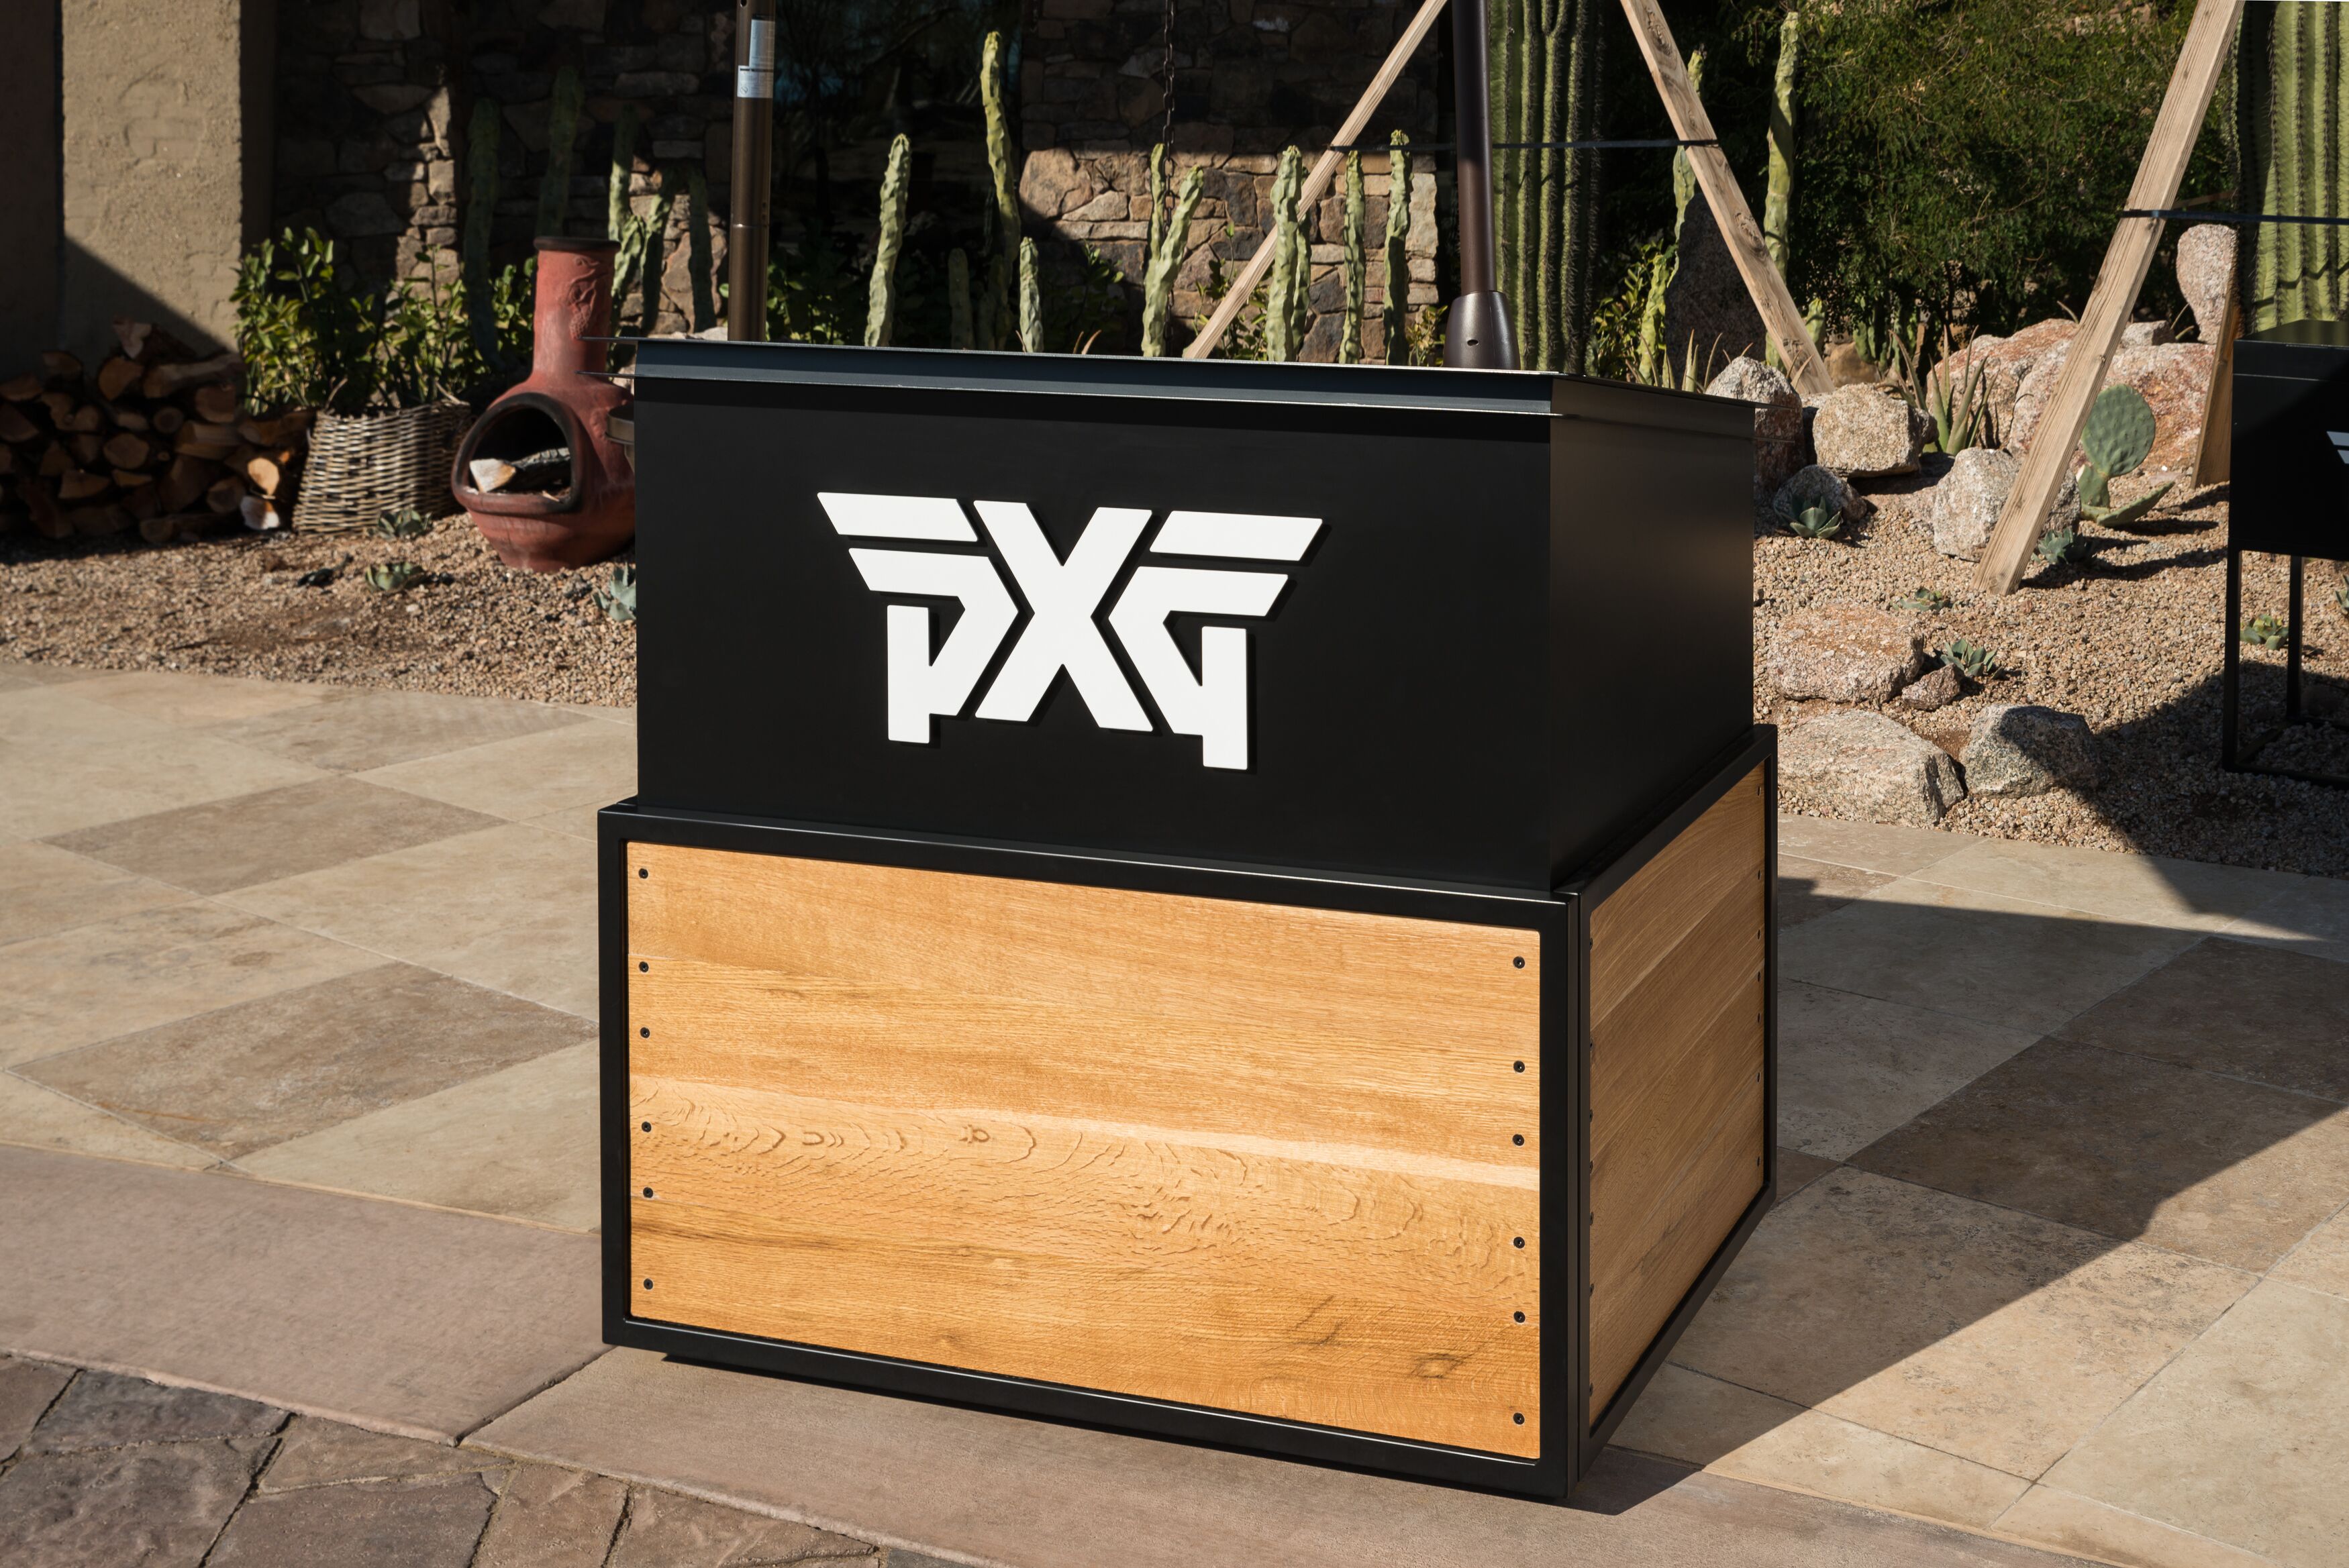 PXG valet stand